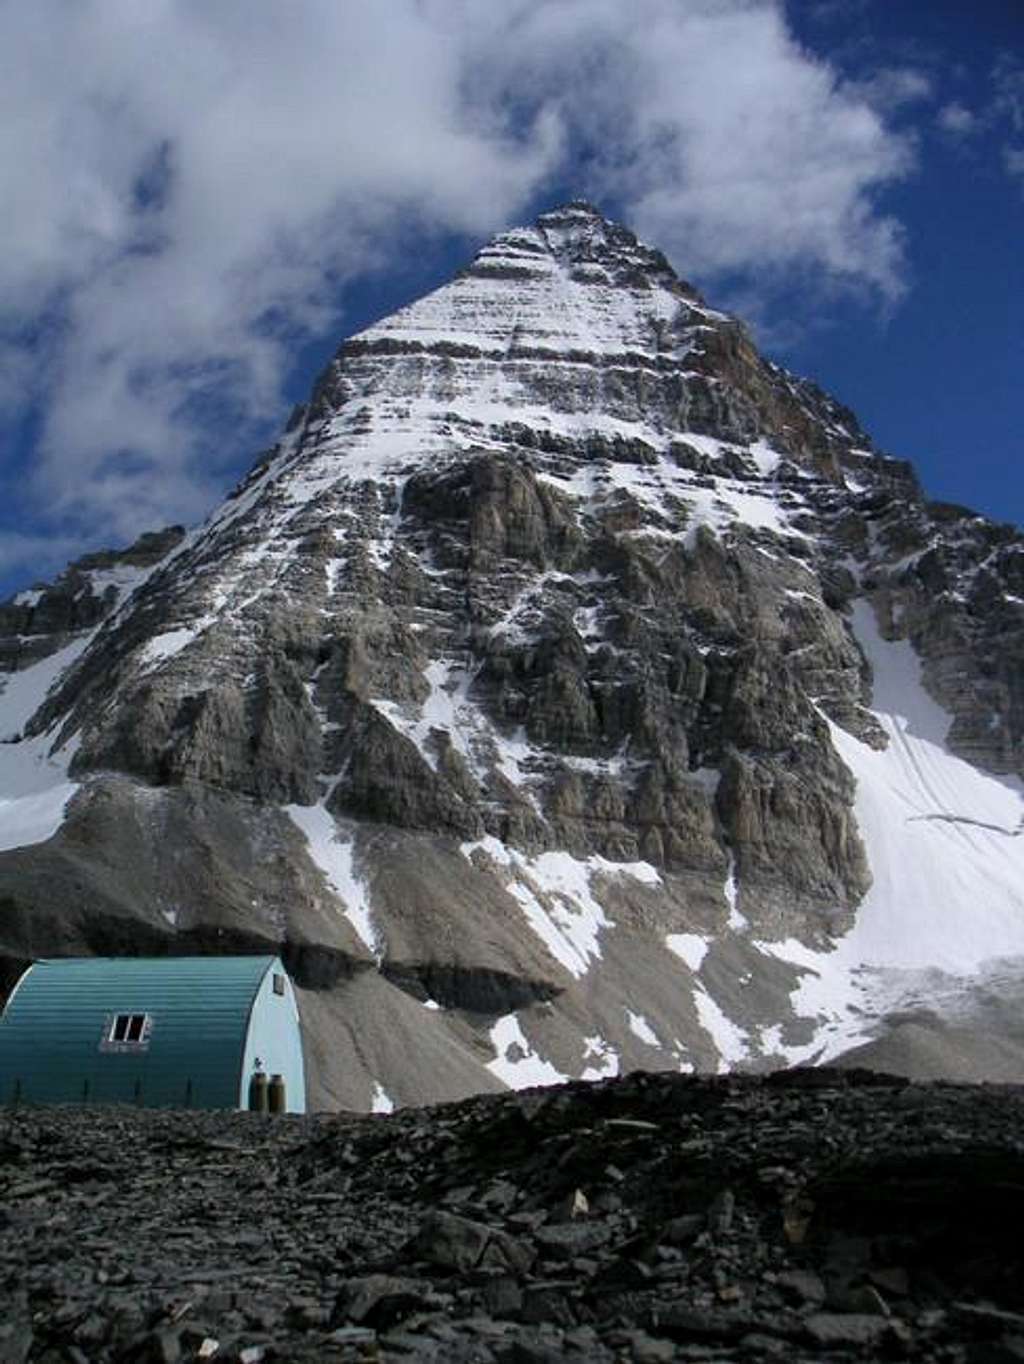 Hind hut to scale